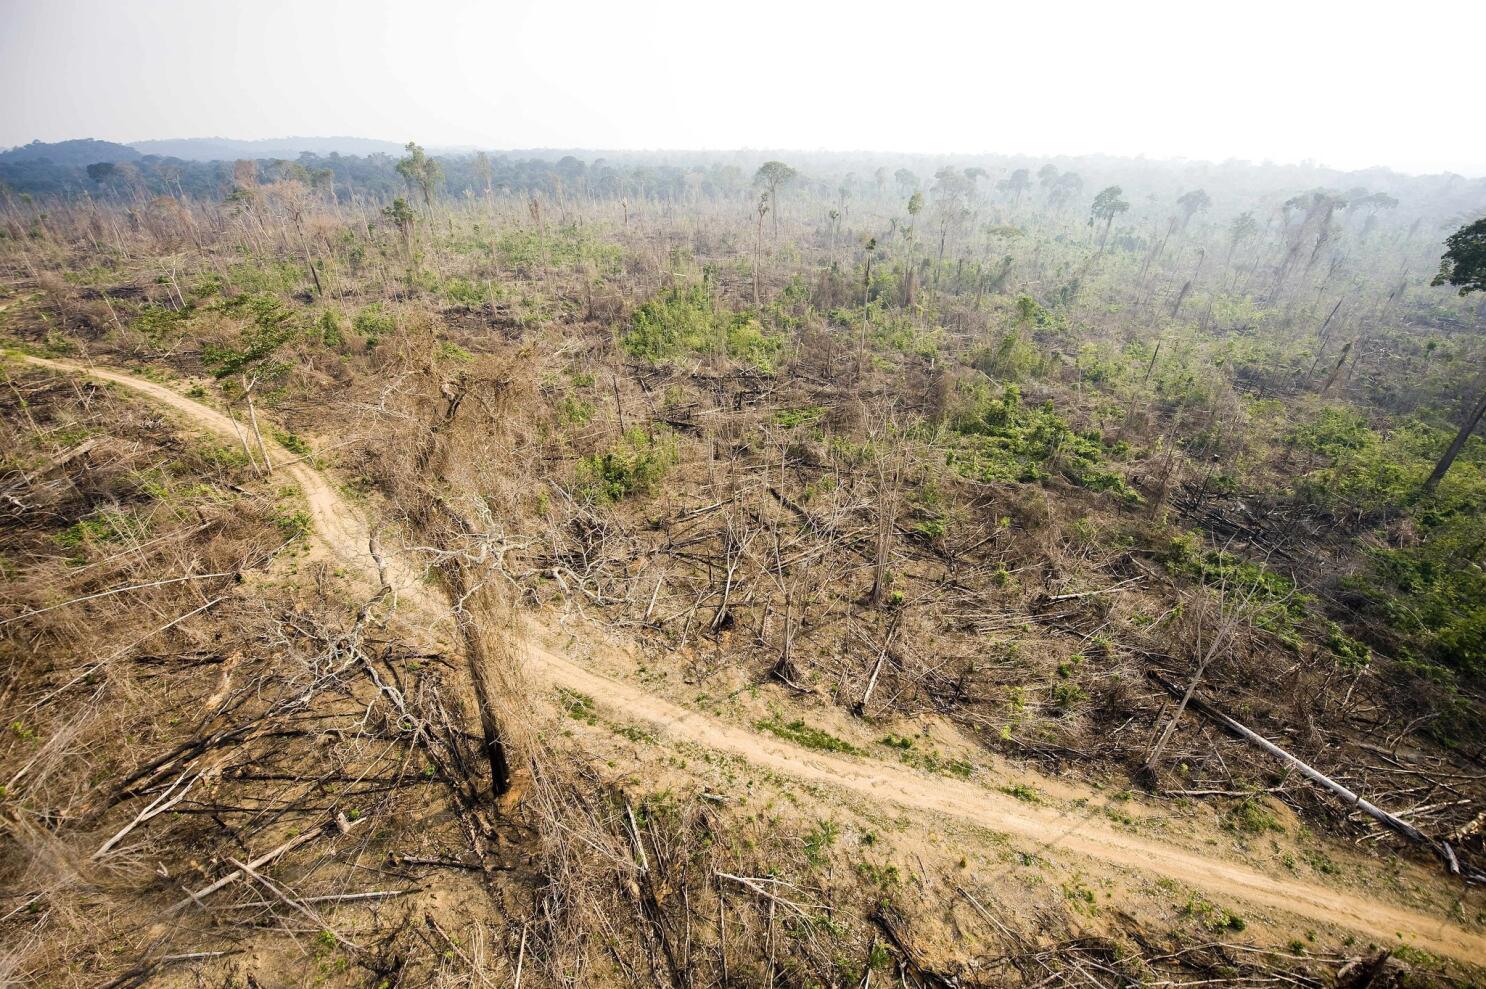 The Amount Of Deforestation In The  Rainforest Matches The Size Of  The US' Biggest States